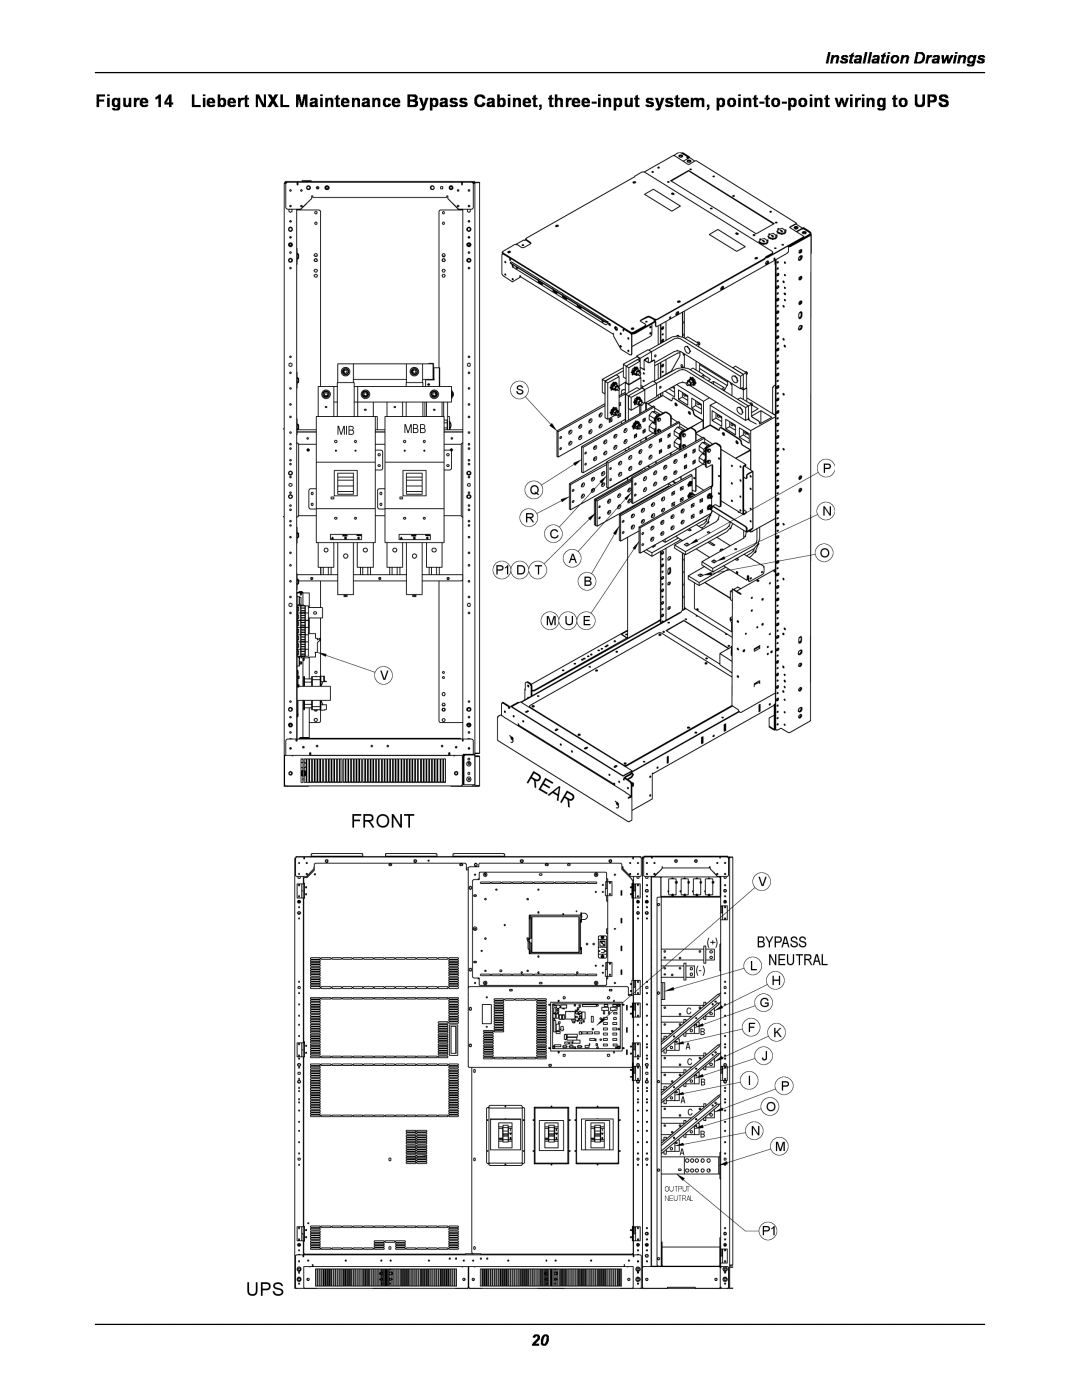 Emerson UPS Systems installation manual Front, Installation Drawings, L Neutral 